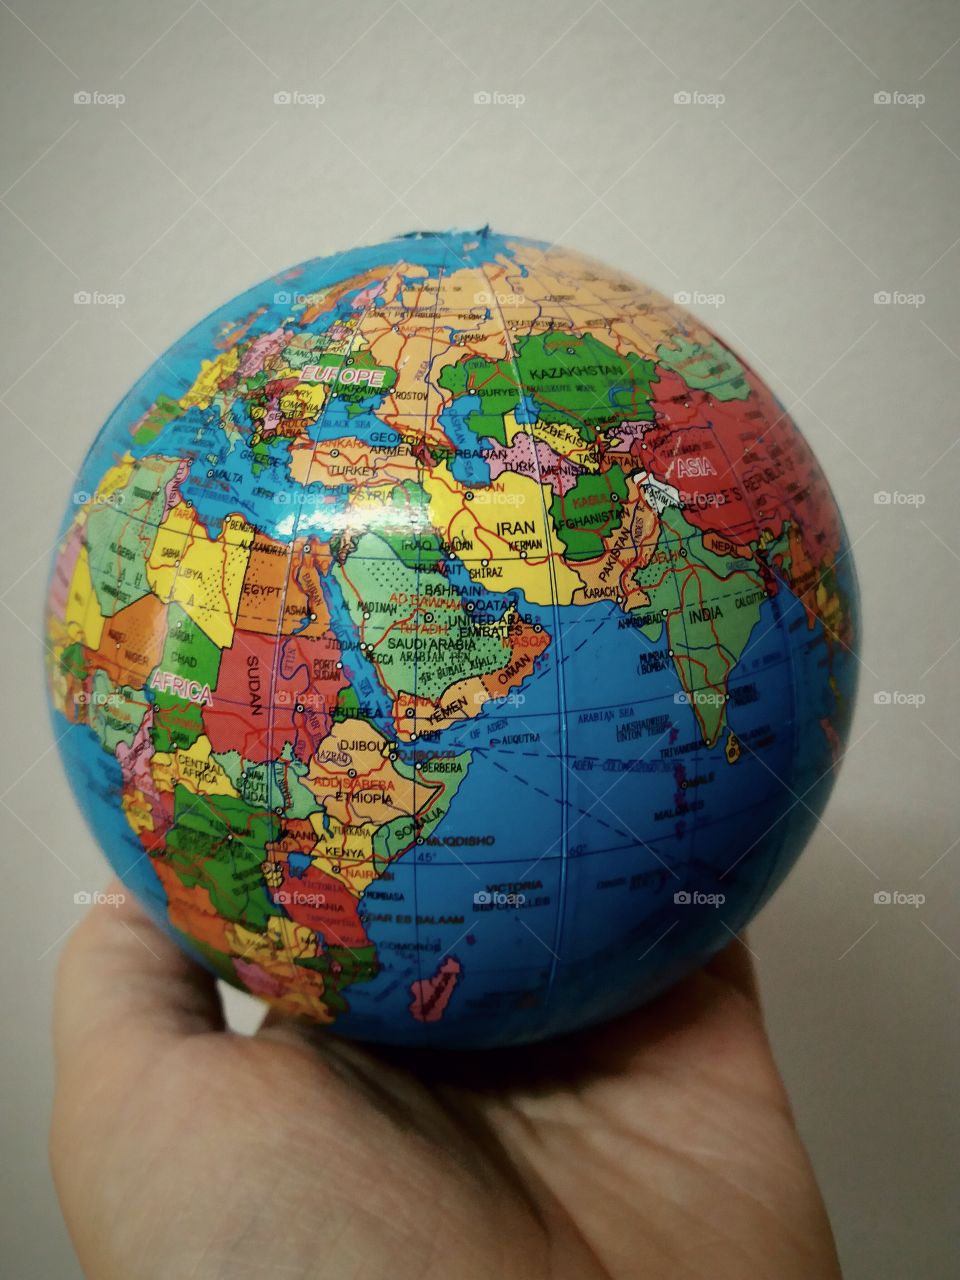 the whole world in one hand